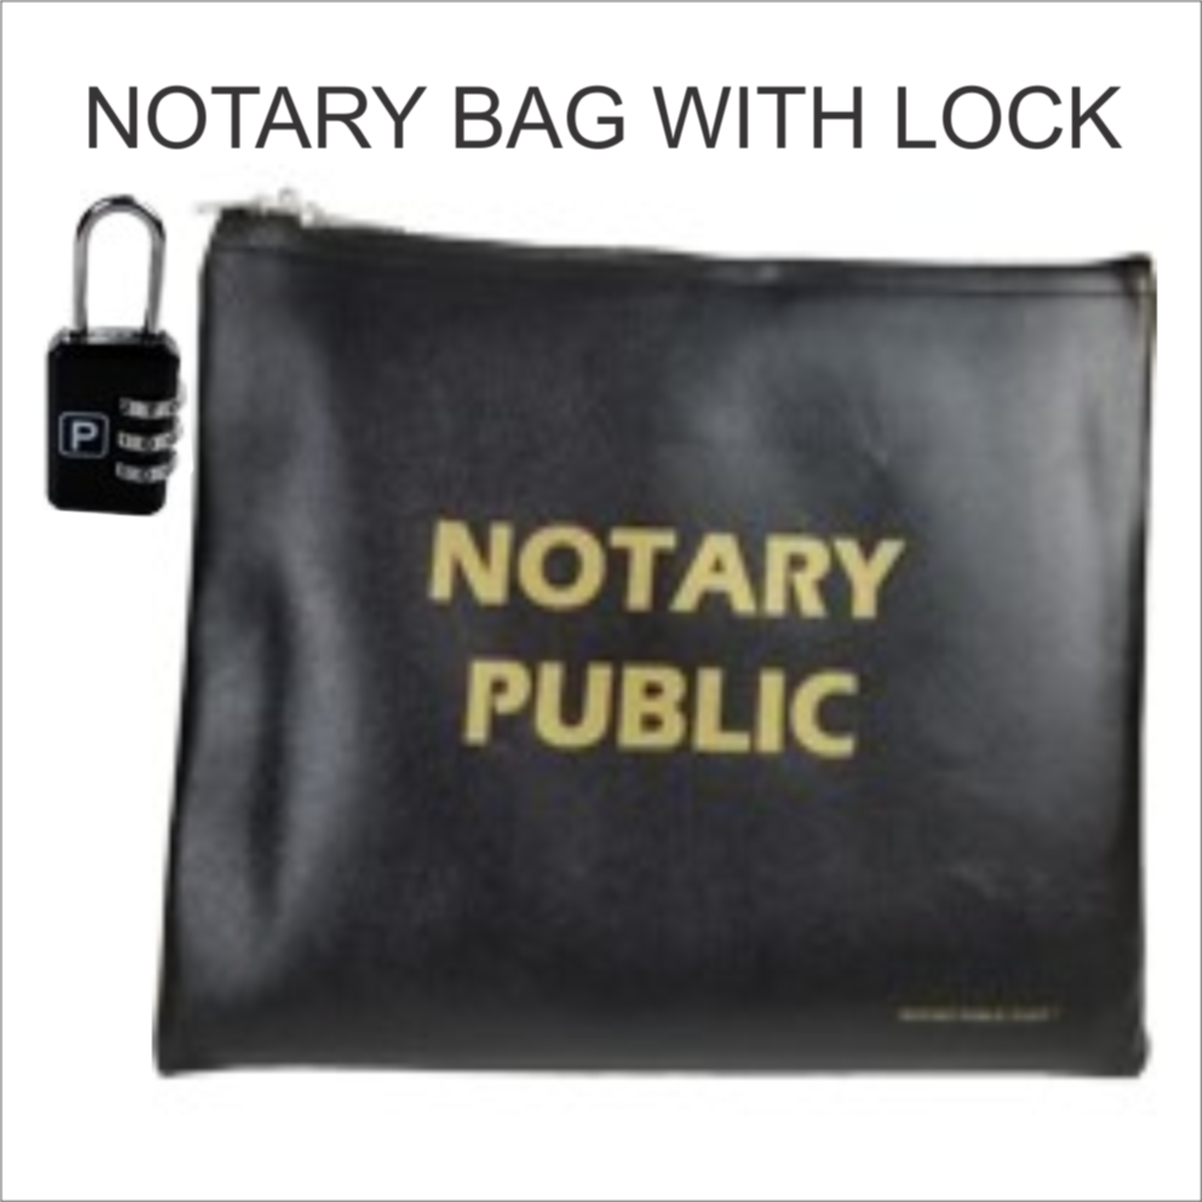 A notary bag with lock on it.